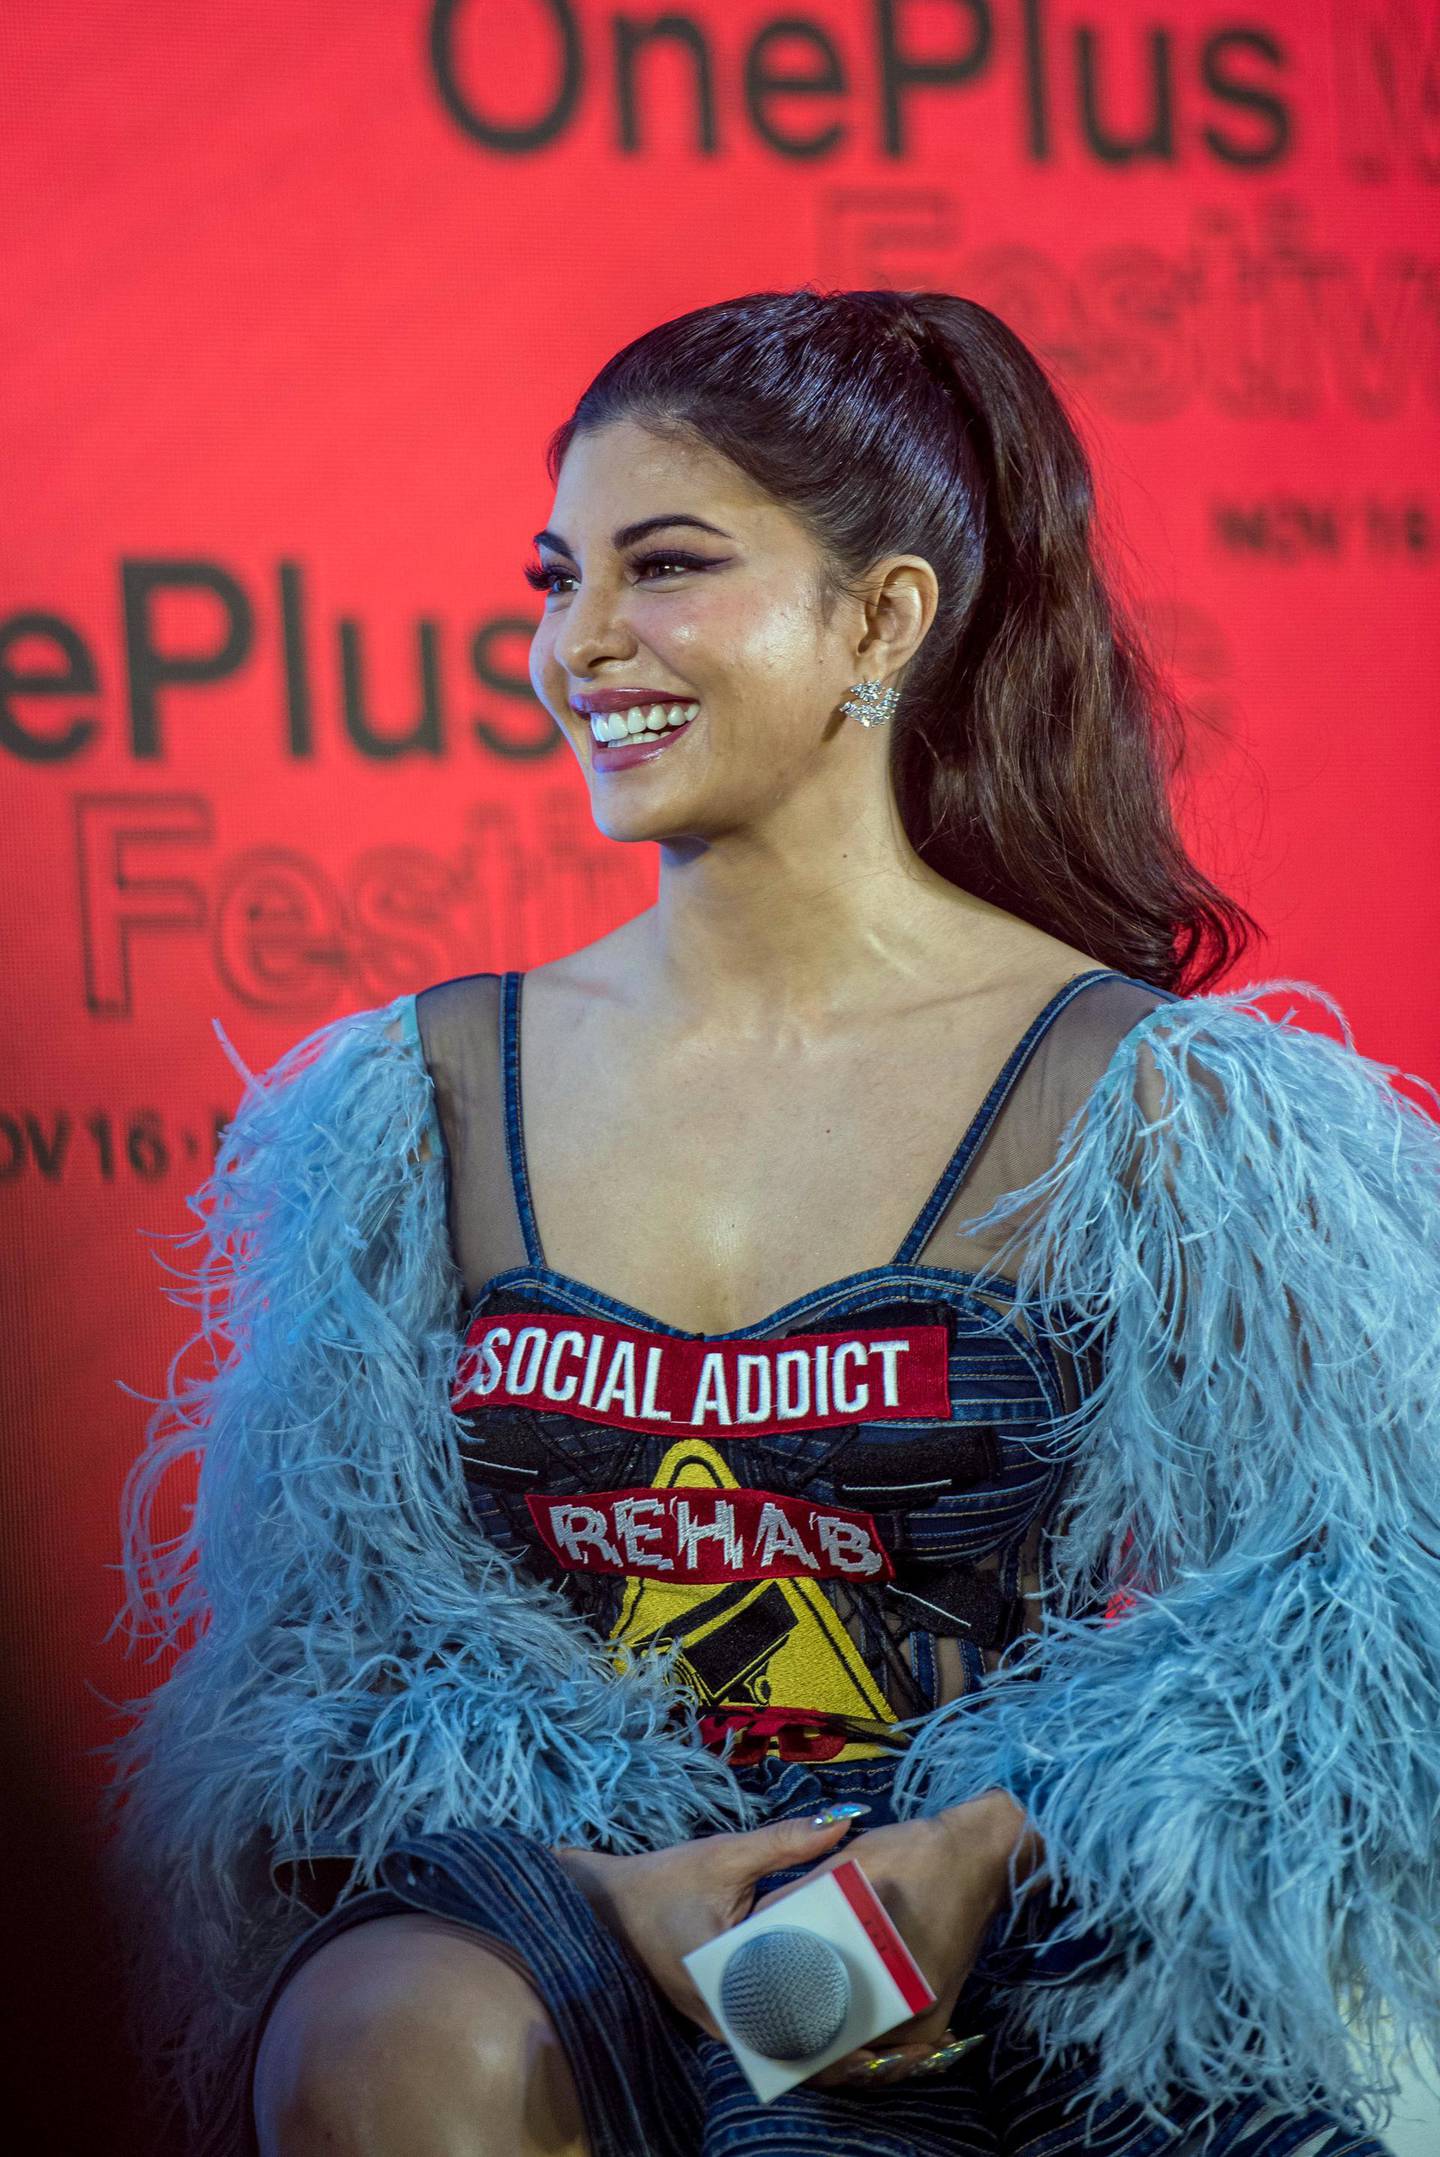 MUMBAI, INDIA  NOVEMBER 12: Bollywood actor Jacqueline Fernandez during a press conference of International Pop Singer Katy Perry, at St Regis Hotel, Lower Parel, ahead of her performance, on November 12, 2019 in Mumbai, India. Landing in India after a long gap of seven years, a rejuvenated Katy Perry shared her plans of going around the streets of Mumbai to try her hands on some local cuisine and also spilled the beans on chances of collaborating with Indian artists. On being asked if she admires any Indian artist or is looking forward to collaborating with them, Perry added, I think thats what the research and development this week is going to be all about. I am going to some really fun party, meet some people from Bollywood, will be hearing some incredible bands. This time is all about immersing and educating myself. (Photo by Aalok Soni/Hindustan Times via Getty Images)